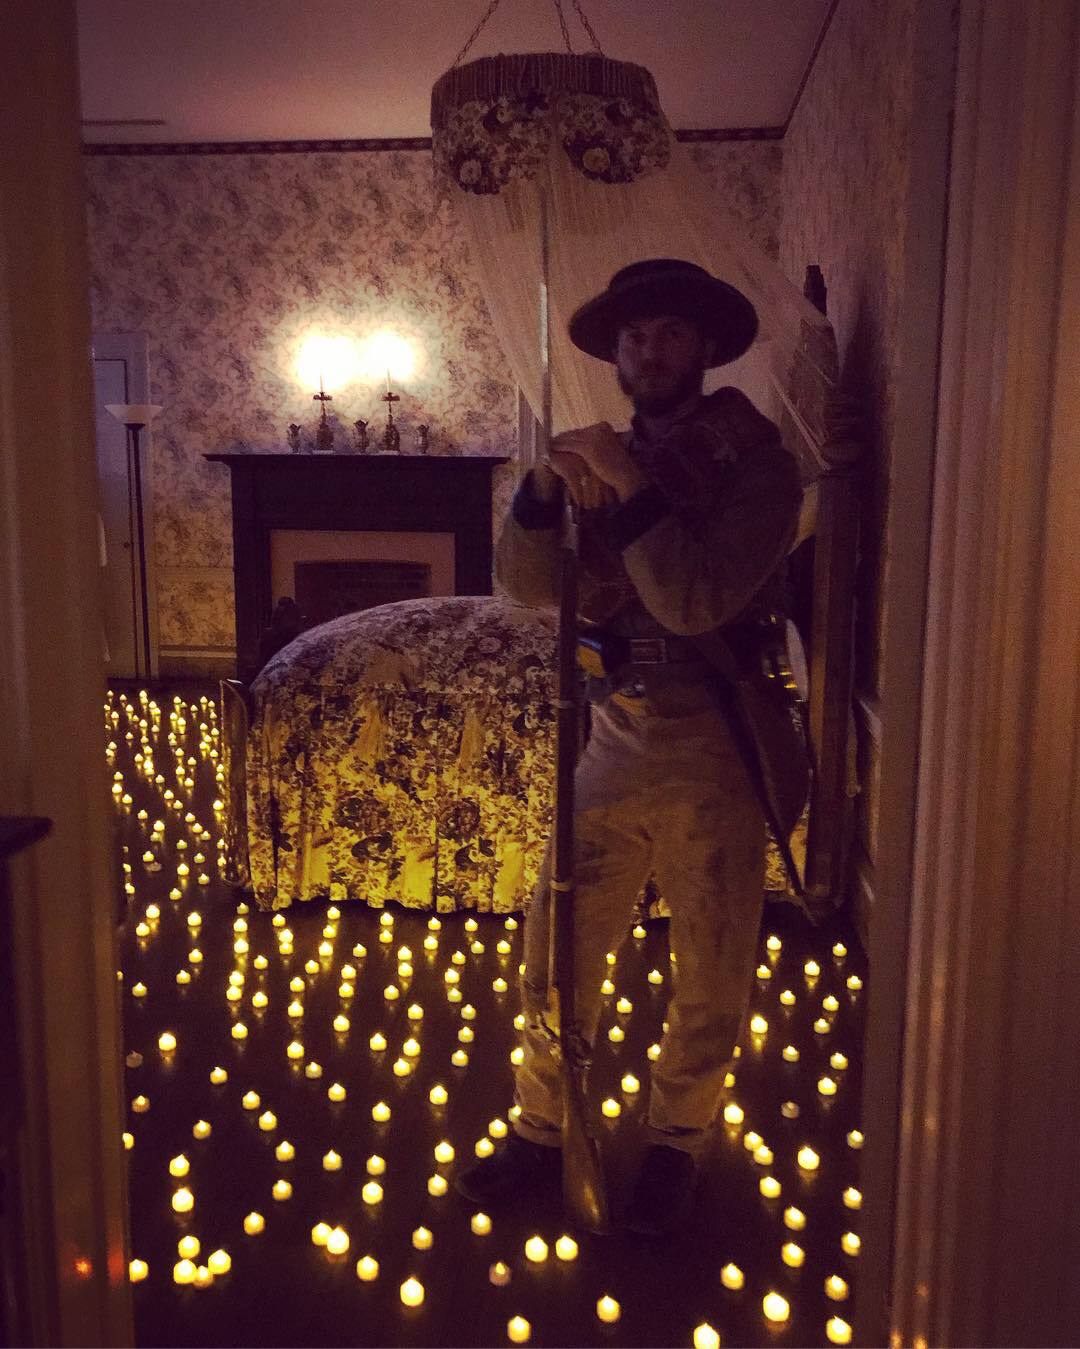 Illumination ceremony in downtown Franklin, Reenactor inside room with luminaries, Battle of Franklin Trust will continue the tradition and display luminaries at the Carter House and Carnton at dusk to honor the casualties inflicted during the Battle of Franklin 157 years ago.